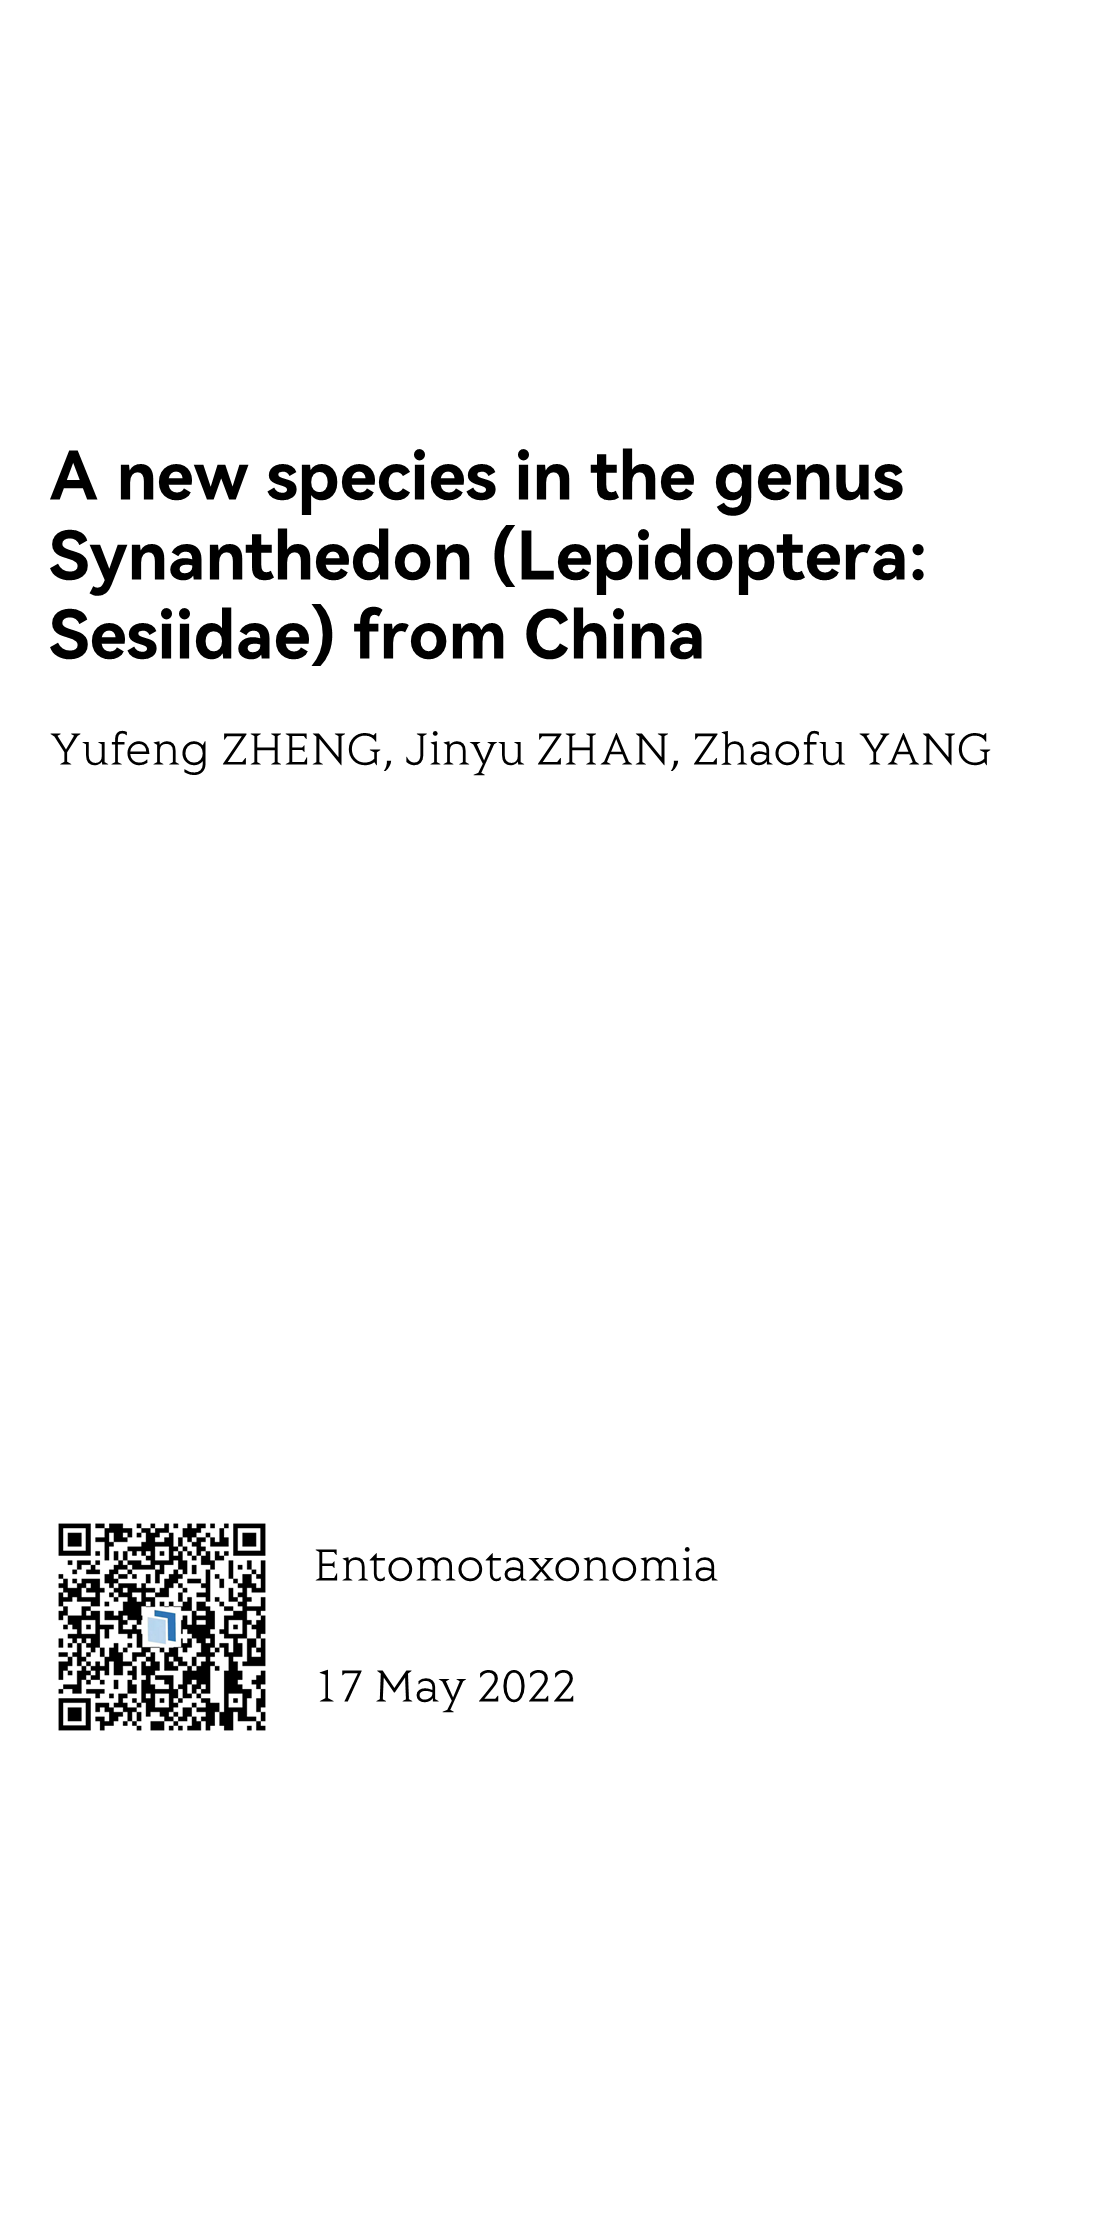 A new species in the genus Synanthedon (Lepidoptera: Sesiidae) from China_1